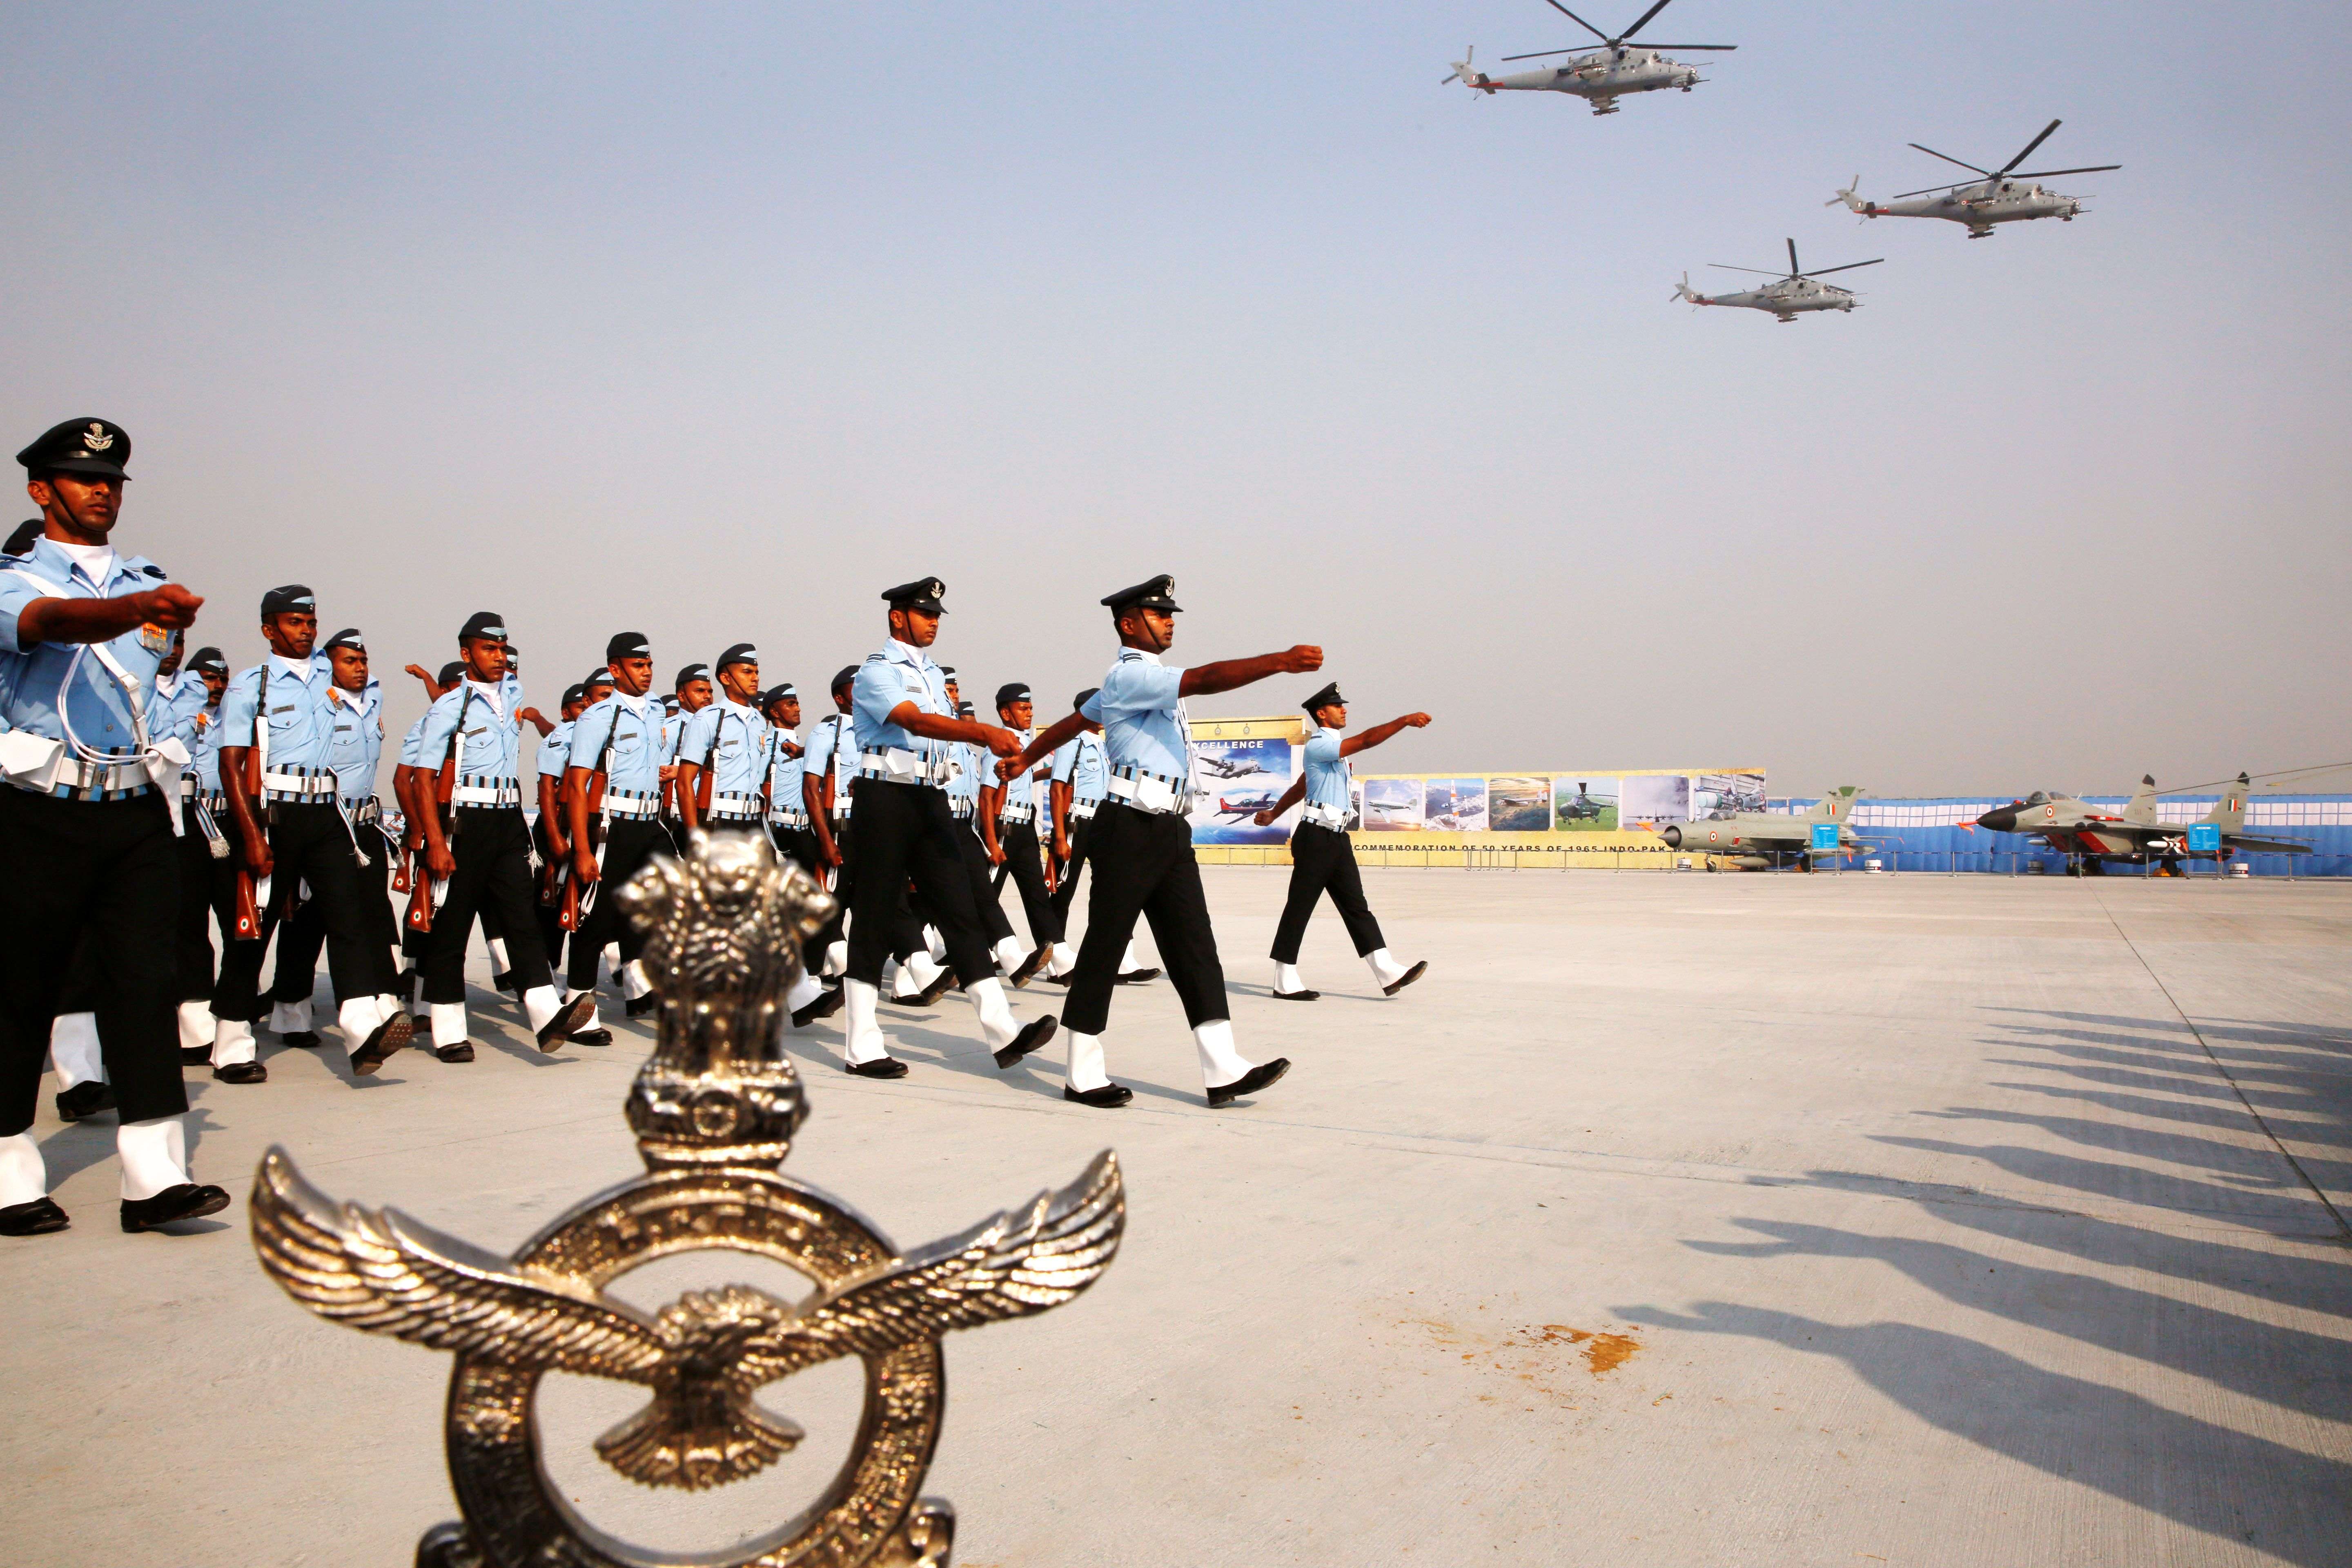 Indian Air Force Mi-35 helicopters fly above  soldiers marching during the Air Force Day parade at Hindon Air Force base near New Delhi, India, Thursday, Oct. 8, 2015. Air Chief Marshal Arup Raha announced Thursday that the IAF would soon have women fighter pilots. (AP Photo/Manish Swarup)